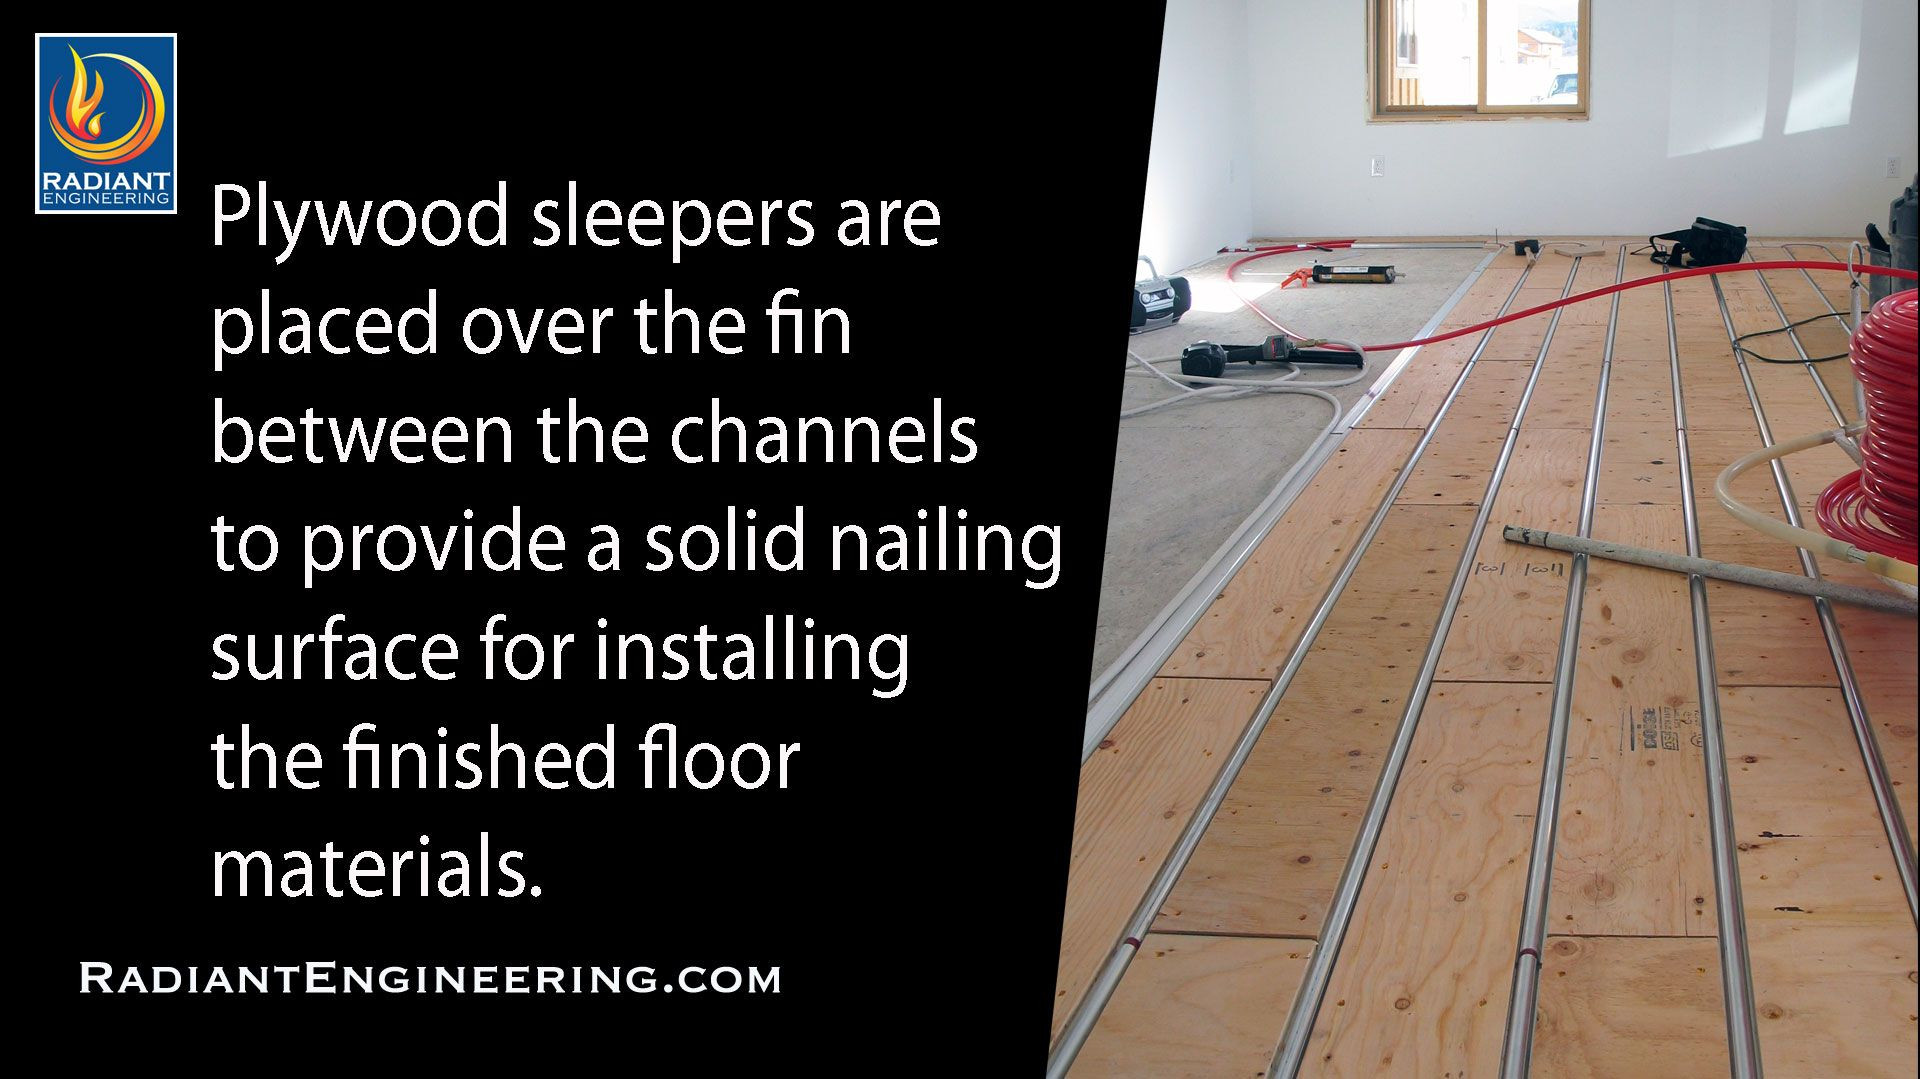 25 Fashionable How to Install Hardwood Floors On Cement 2024 free download how to install hardwood floors on cement of radiant heated floor installation with thermofin u and pex tubing with radiant heated floor installation with thermofin u and pex tubing ready for